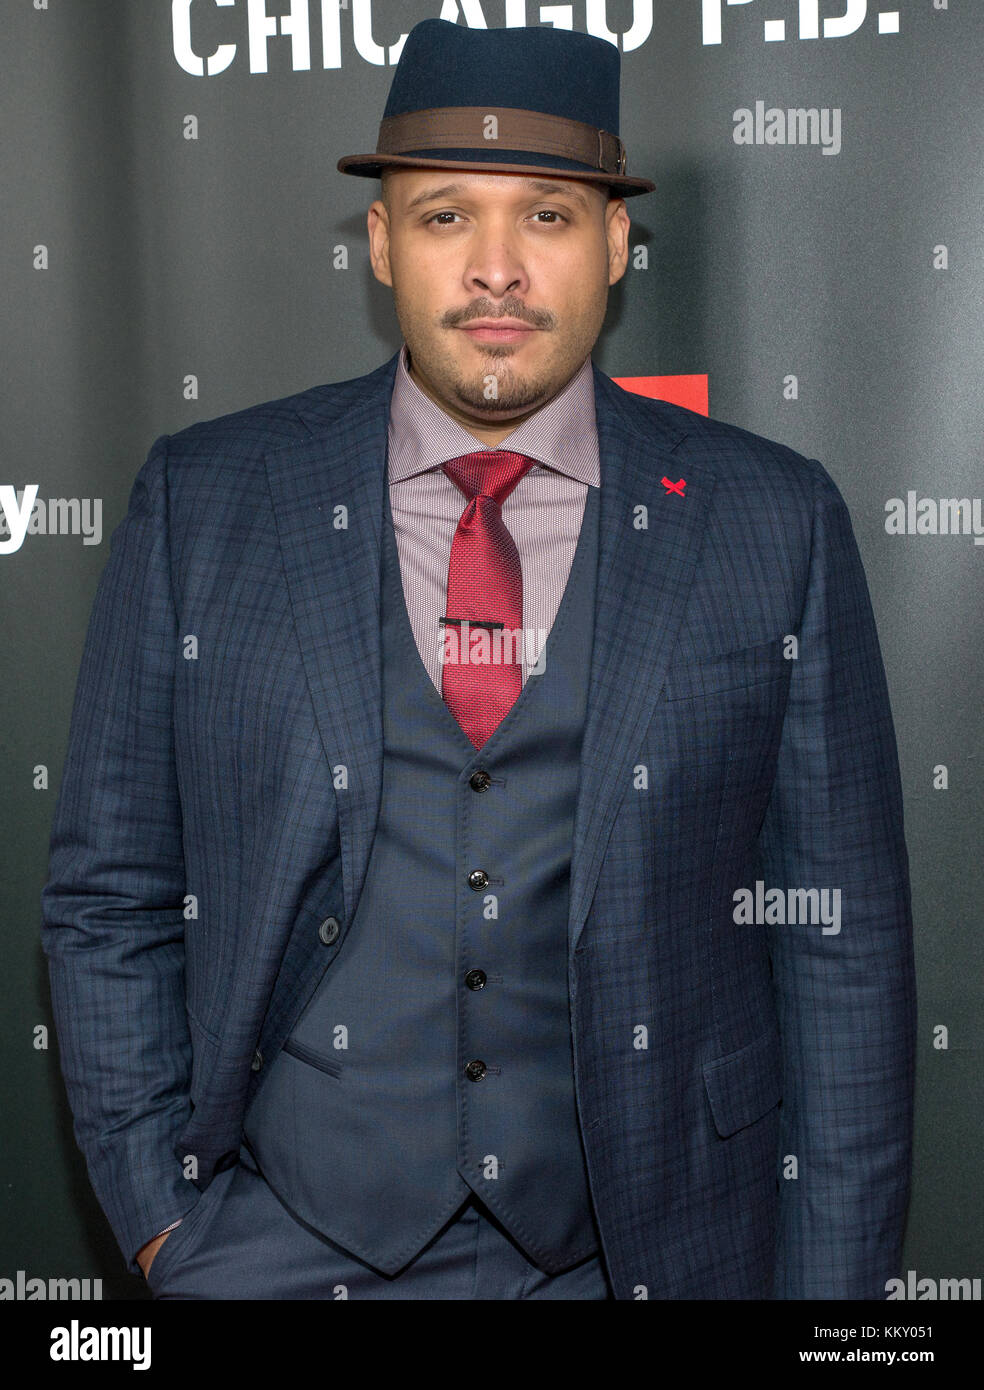 3rd annual NBC One Chicago Party featuring cast members from Chicago Fire, Chicago Med and Chicago P.D - Arrivals  Featuring: Joe Minoso Where: Chicago, Illinois, United States When: 30 Oct 2017 Credit: WENN Stock Photo